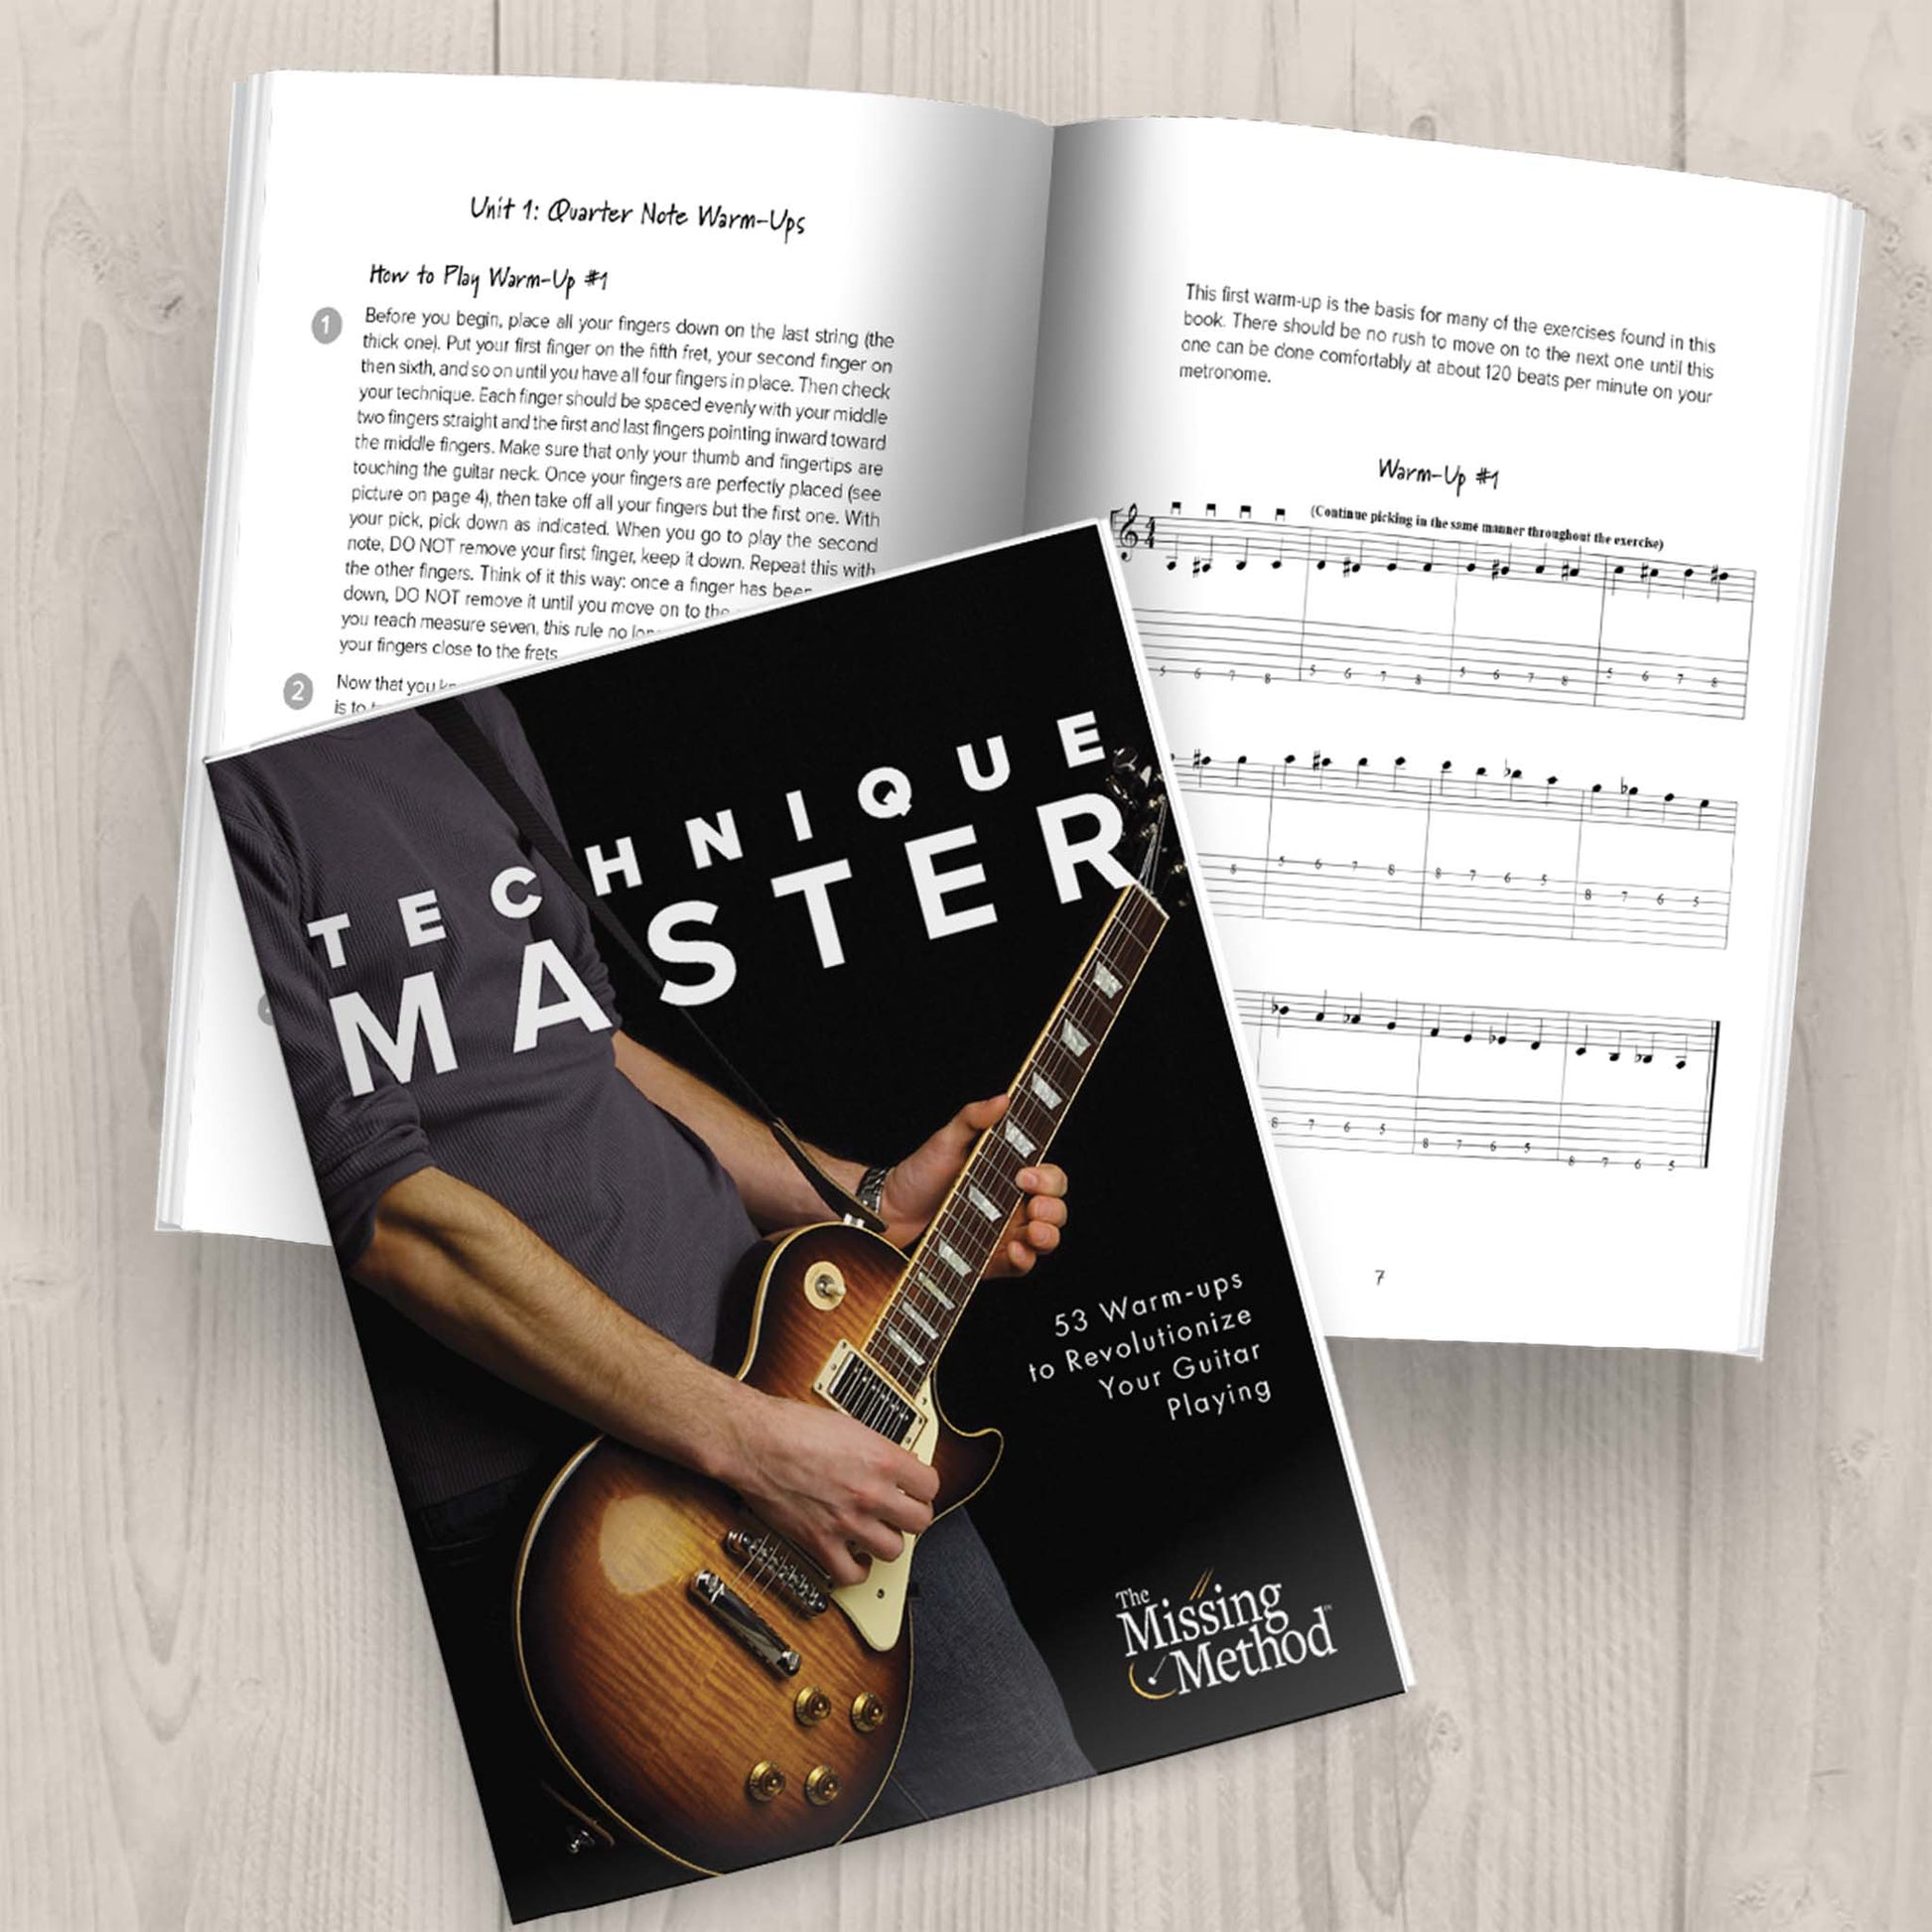 Technique Master from The Missing Method for Guitar. Image of two copies of the book on a tabletop, one open and displaying the first part of the first set of warm-ups. The second book closed, displaying the front cover.